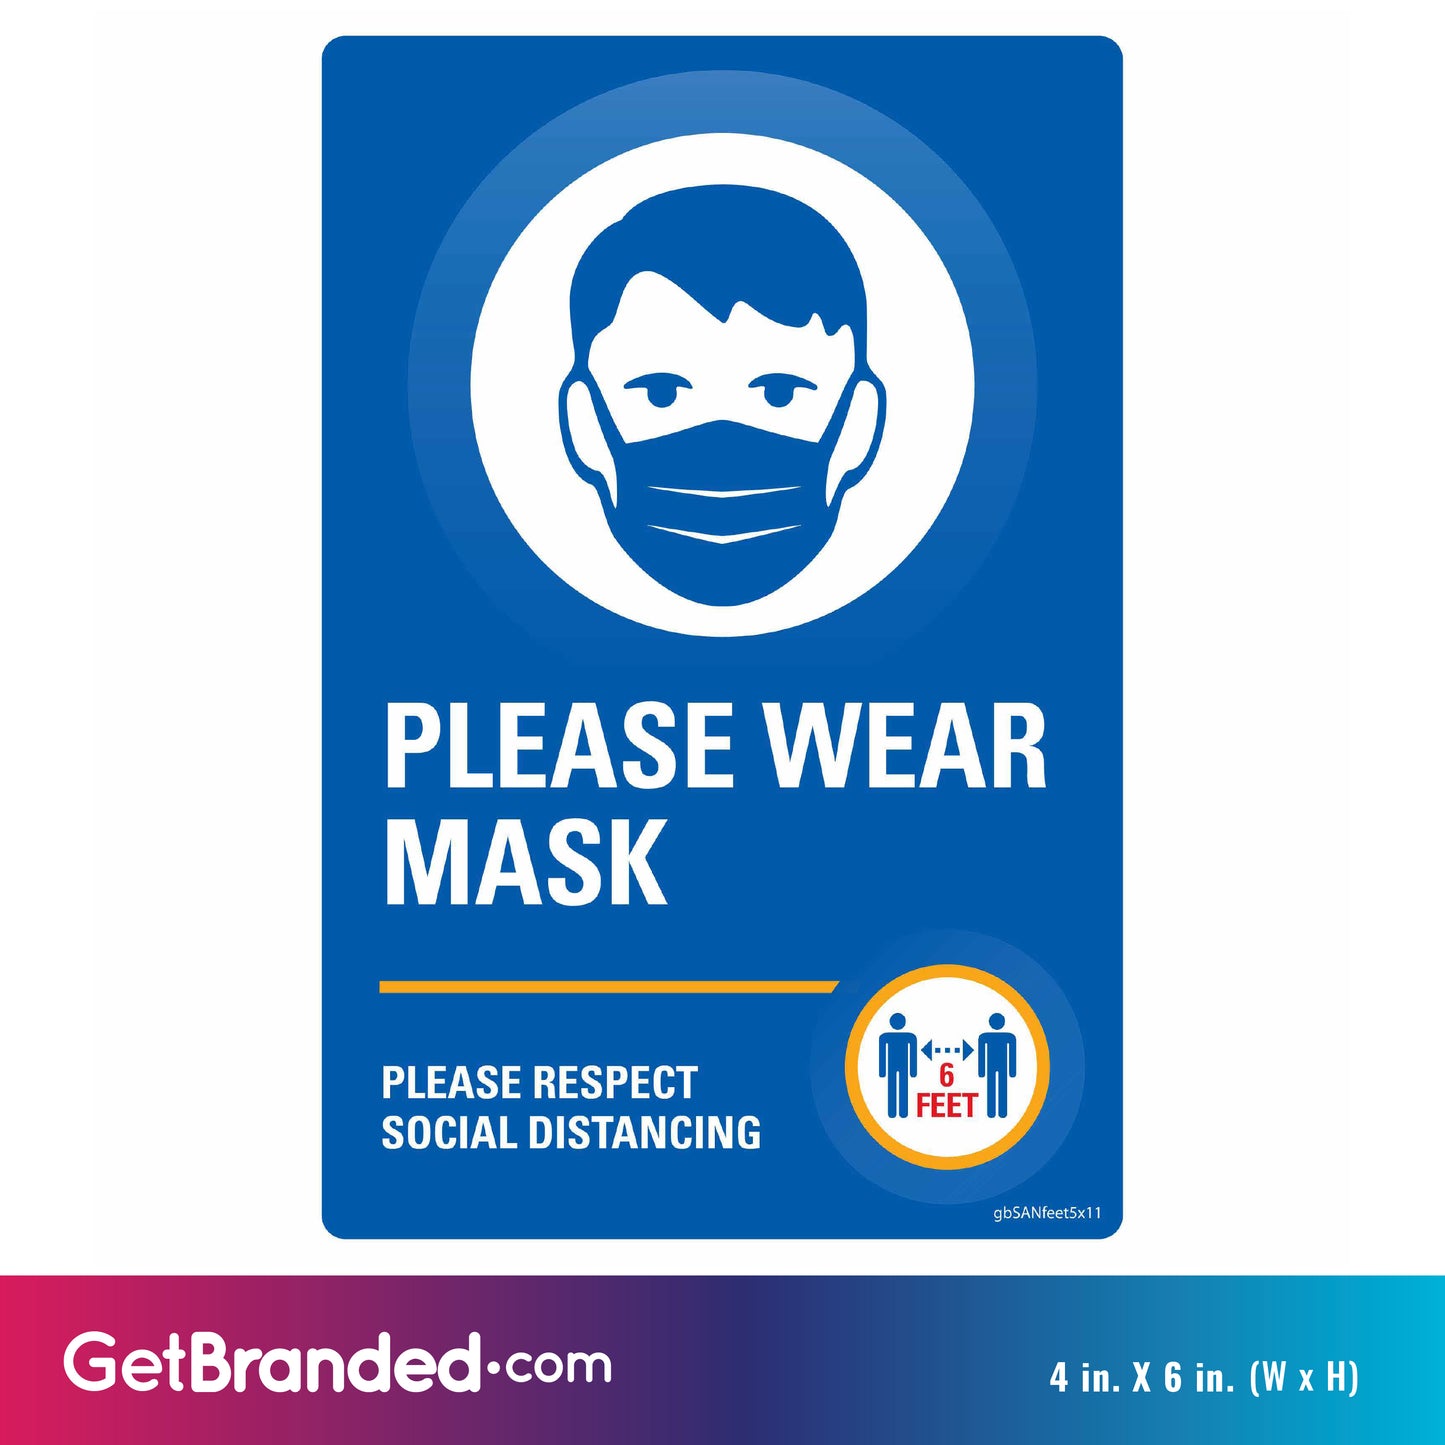 Wear a Mask Decal size guide.